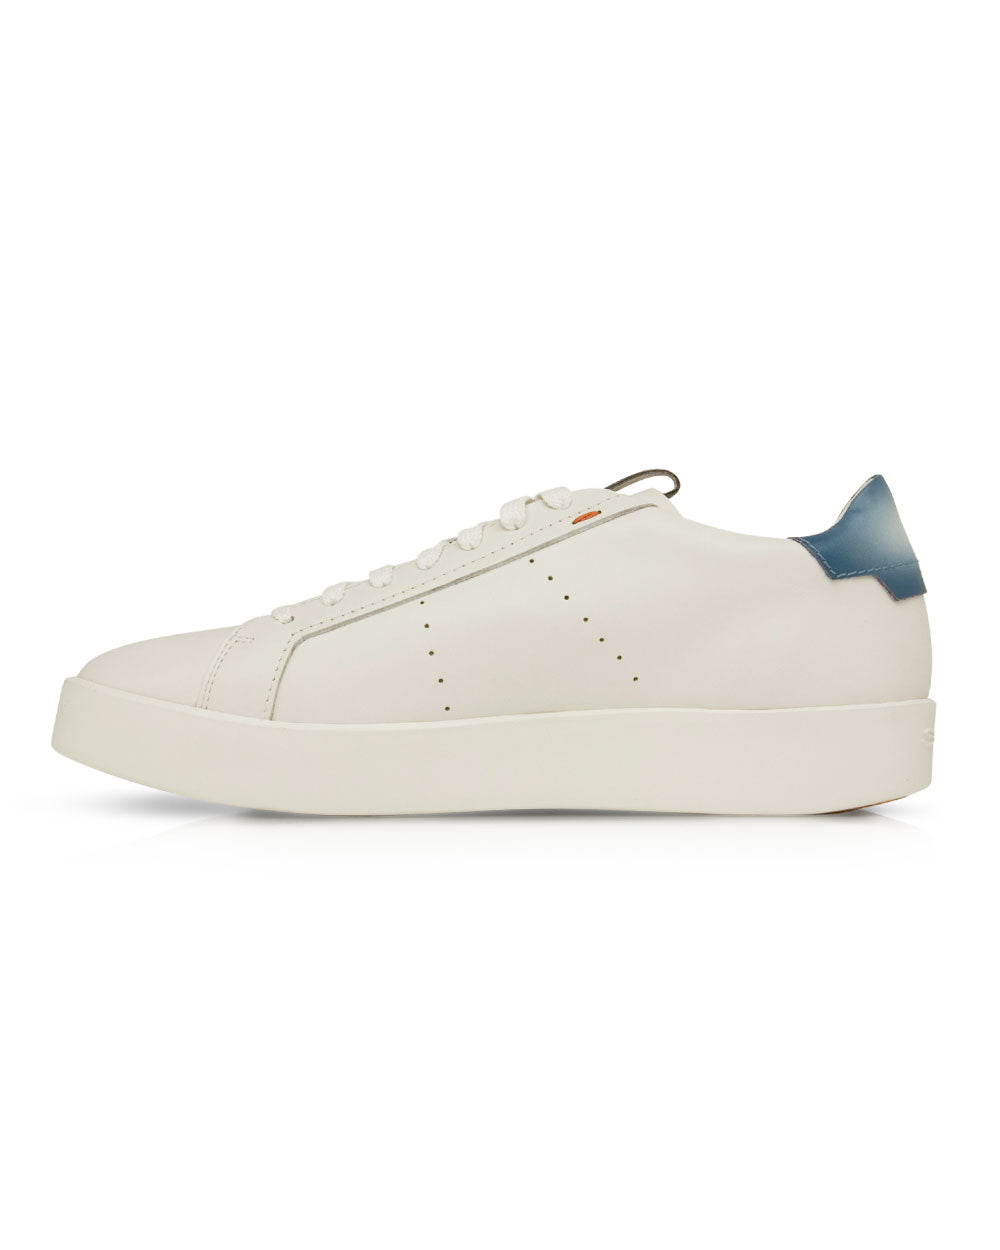 Colorblock Leather Sneaker in White and Blue